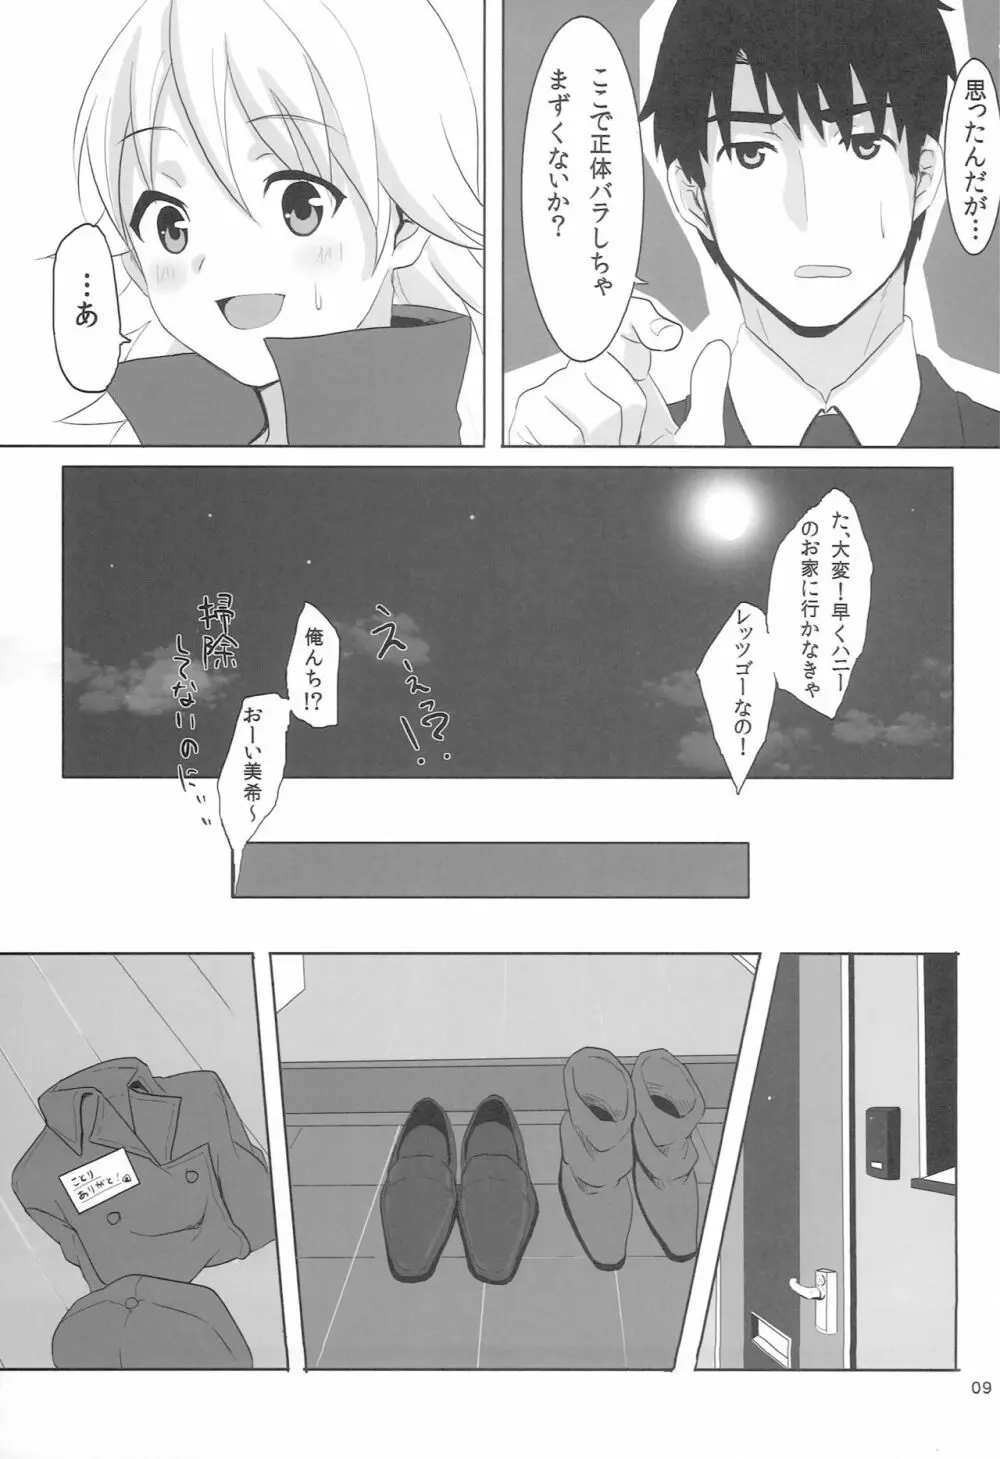 With your smile - page8